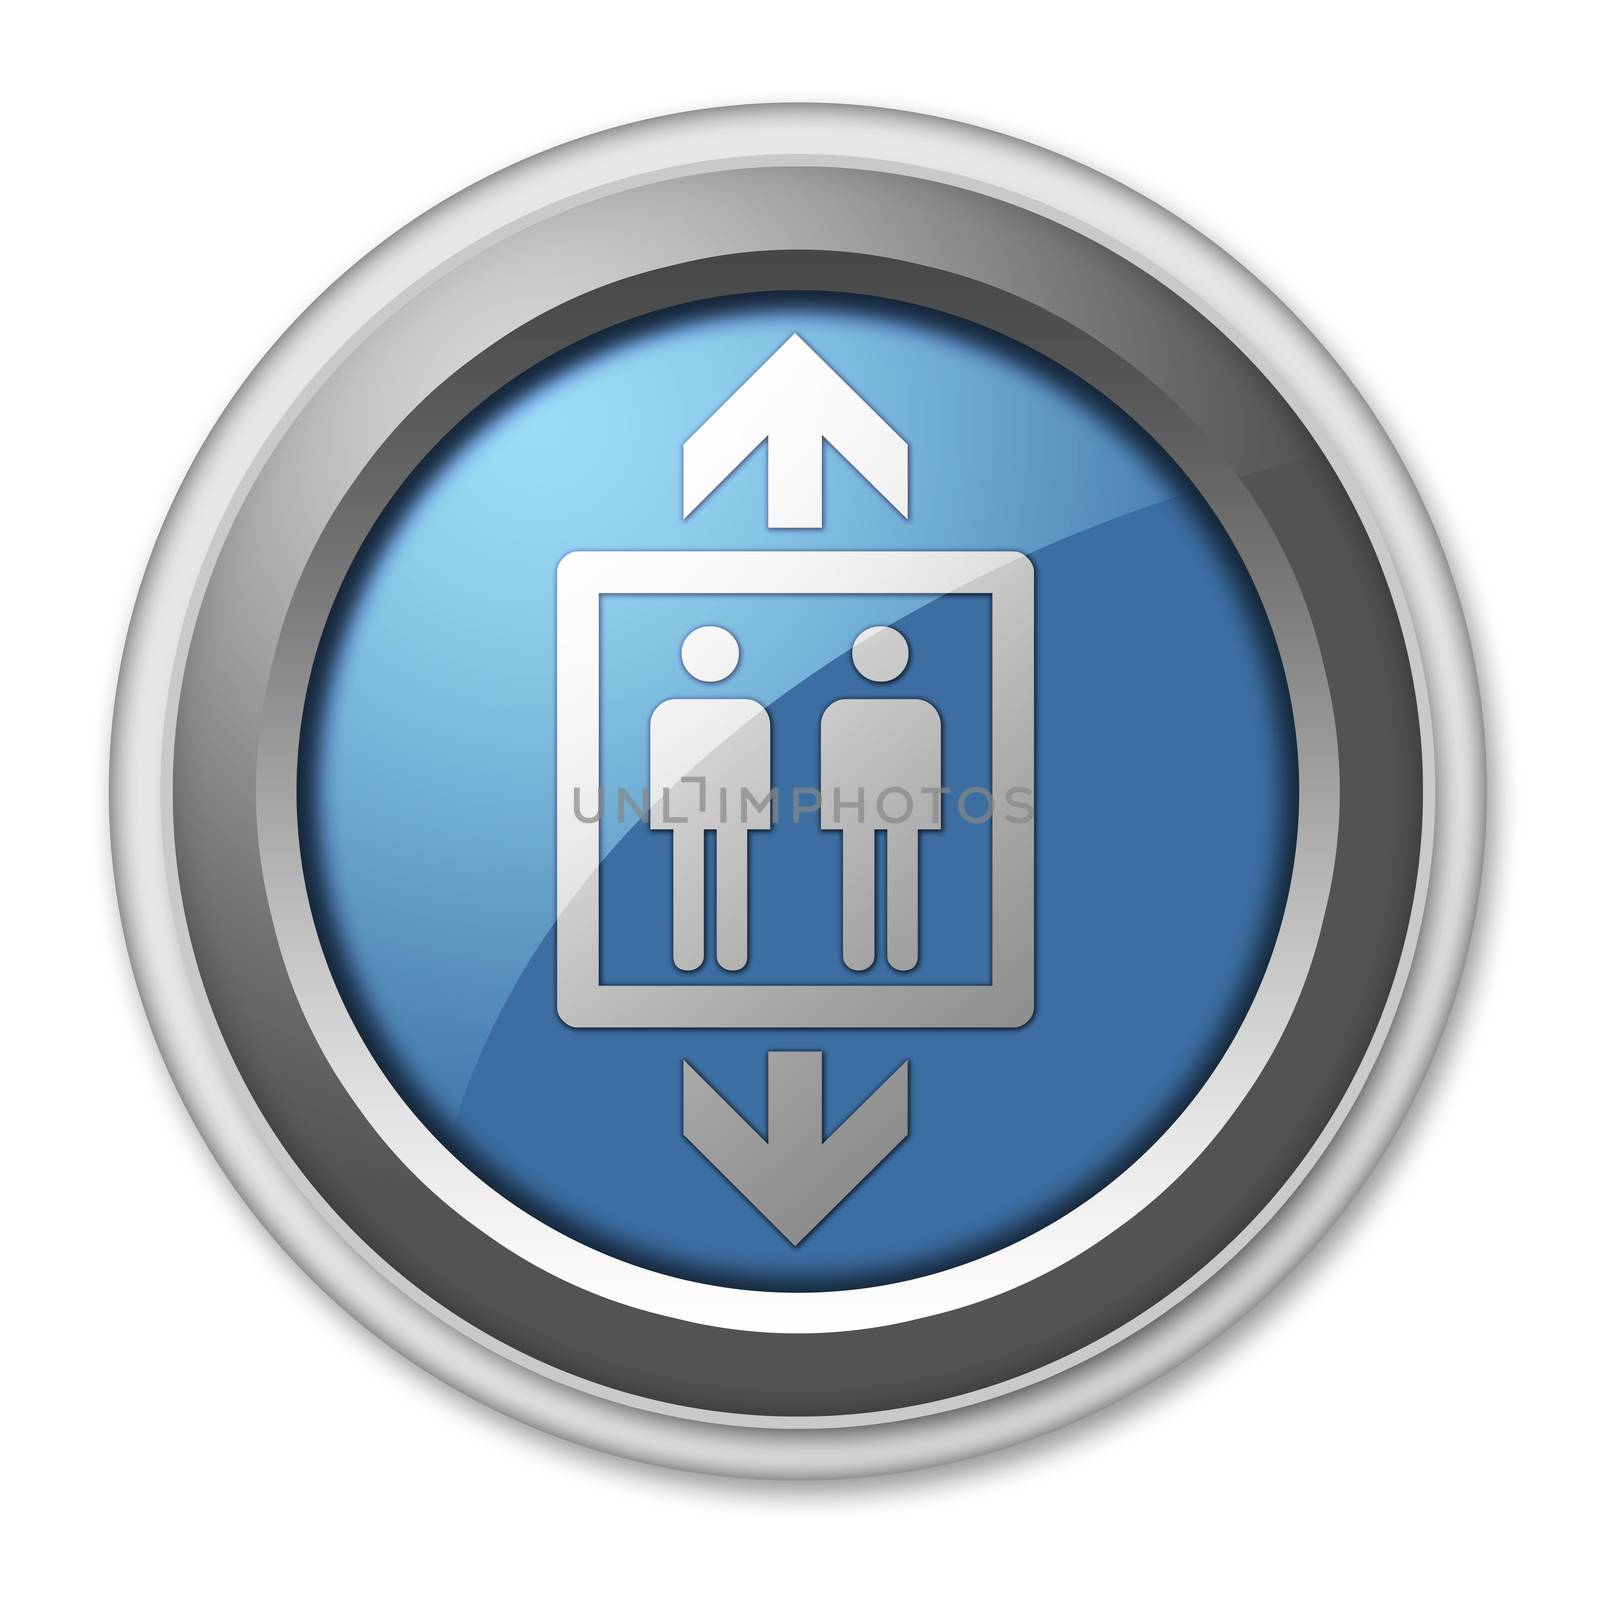 Icon, Button, Pictogram with Elevator symbol